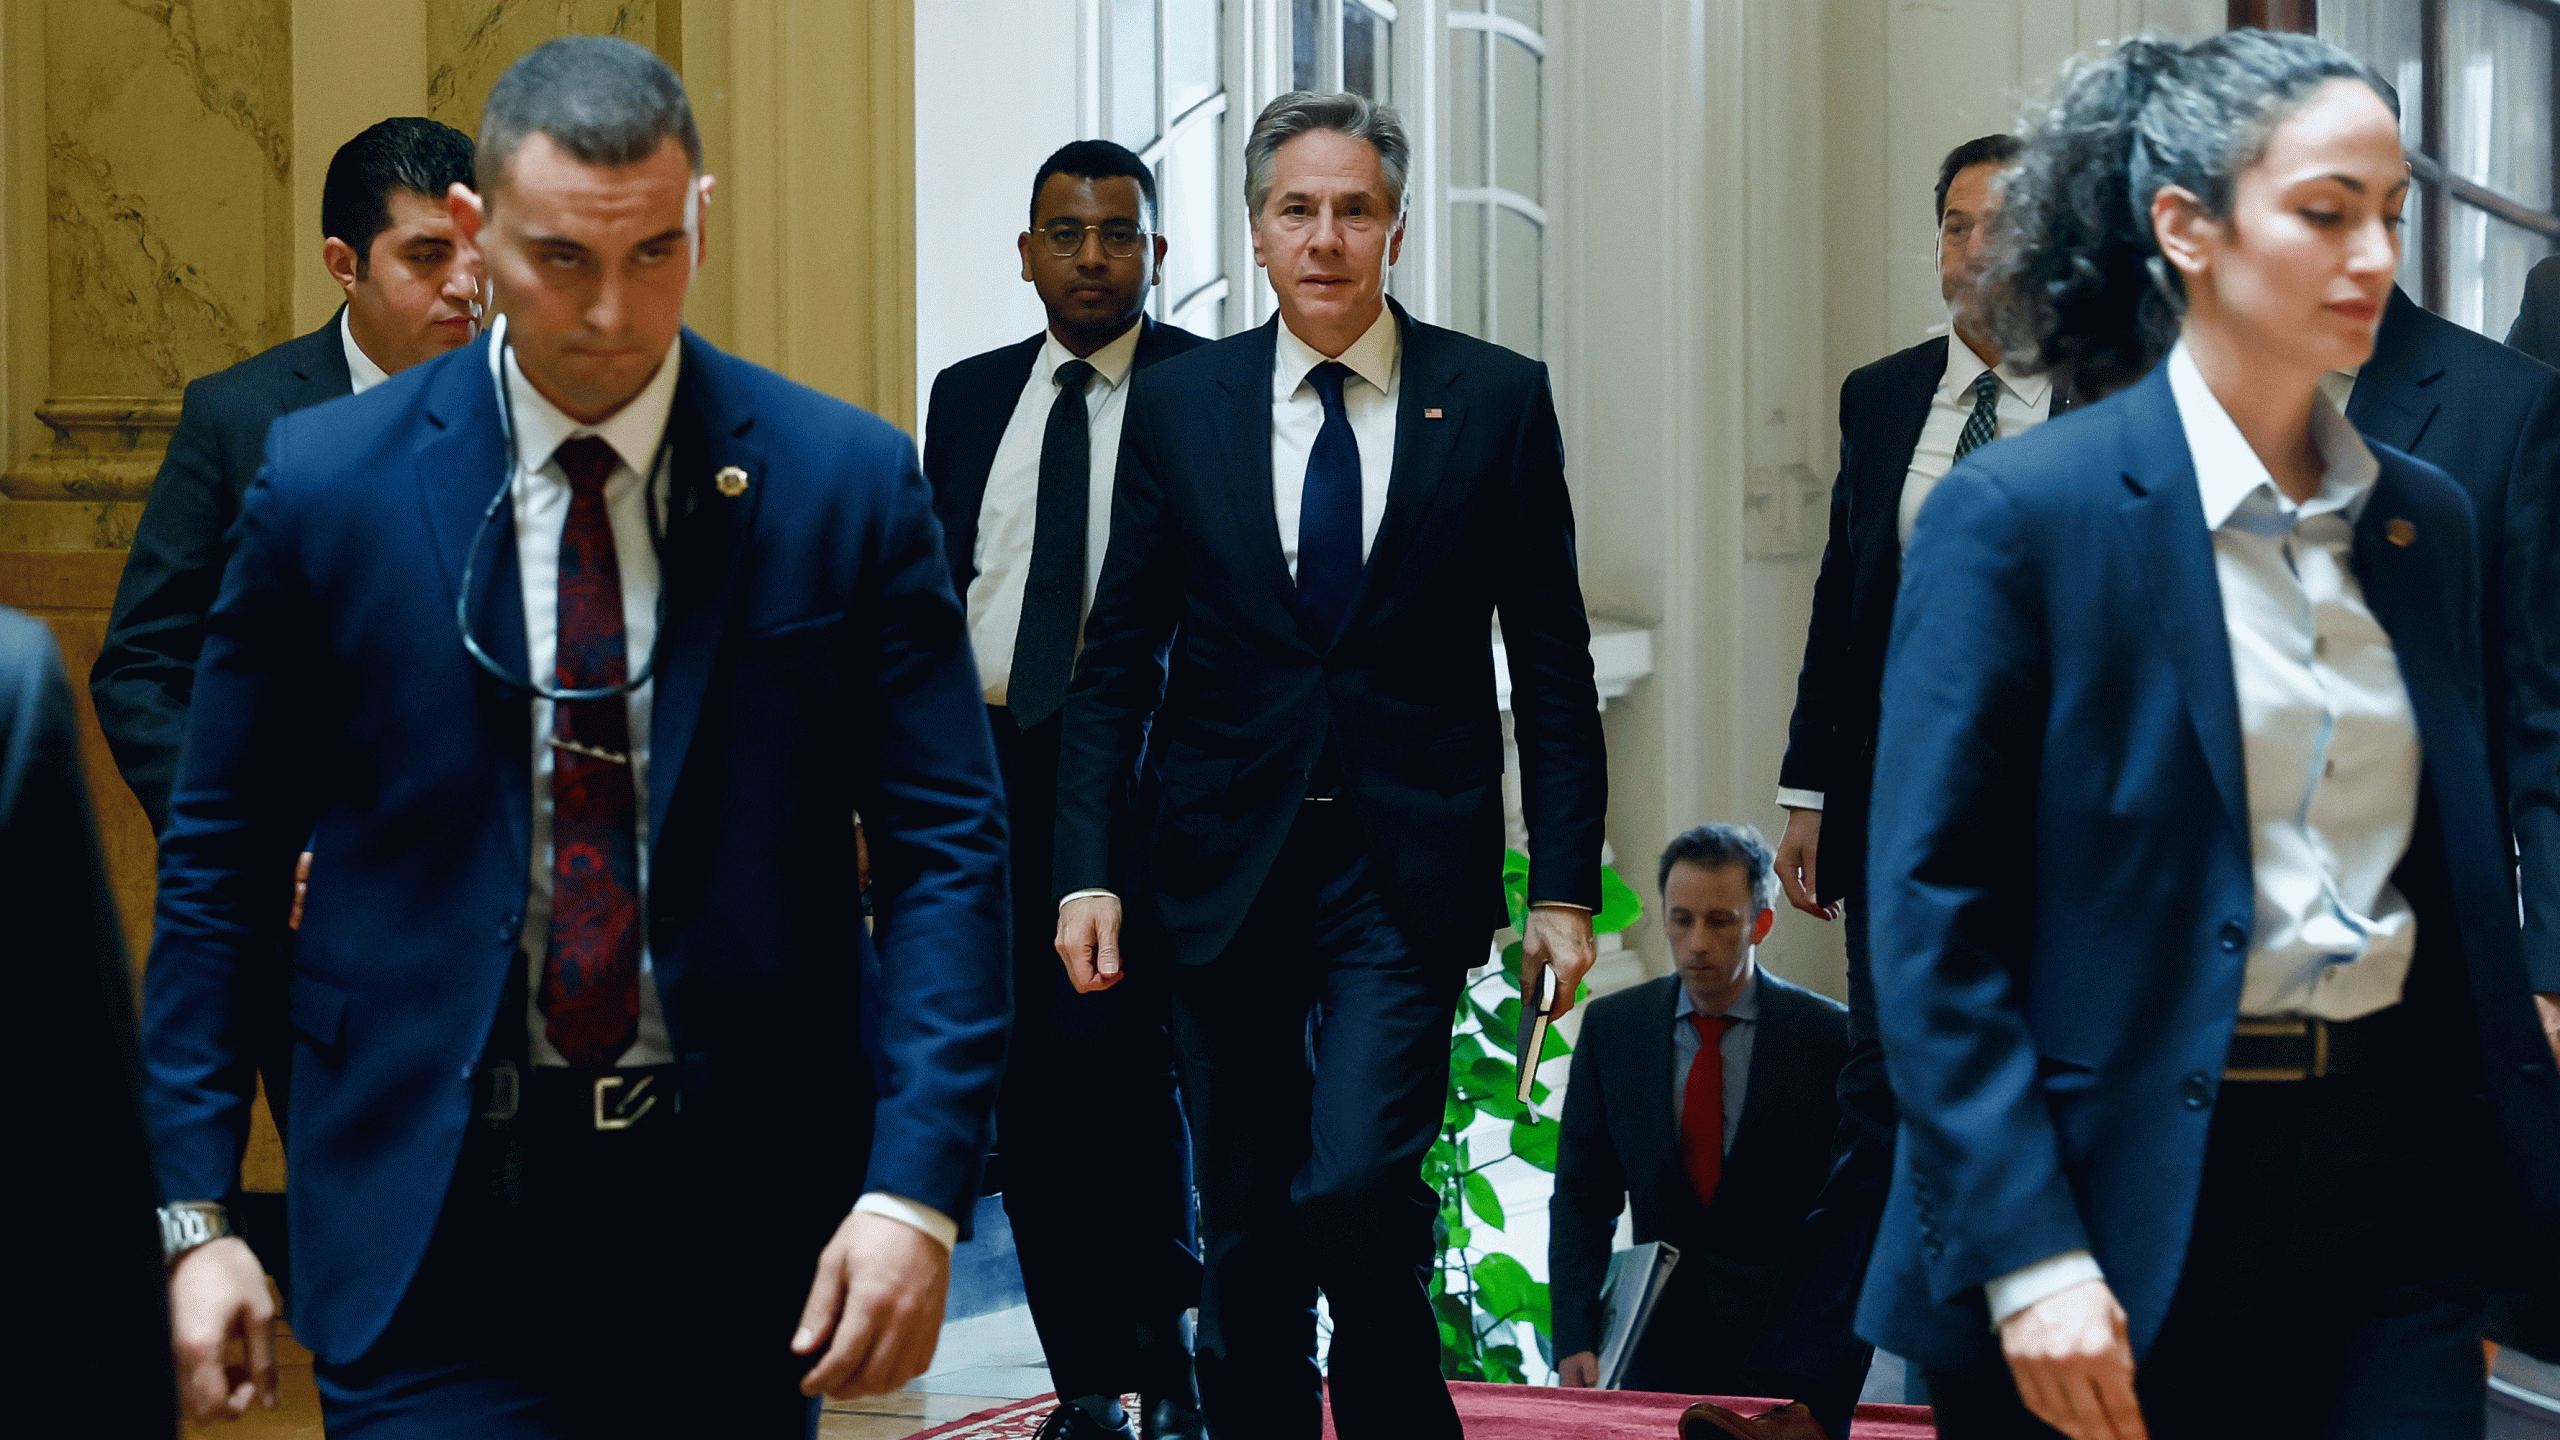 U.S. Secretary of State Antony Blinken, centre, walks to meet with Egyptian Foreign Minister Sameh Shoukry, in Cairo, Egypt, Thursday, March 21, 2024. (Evelyn Hockstein/Pool Photo via AP)